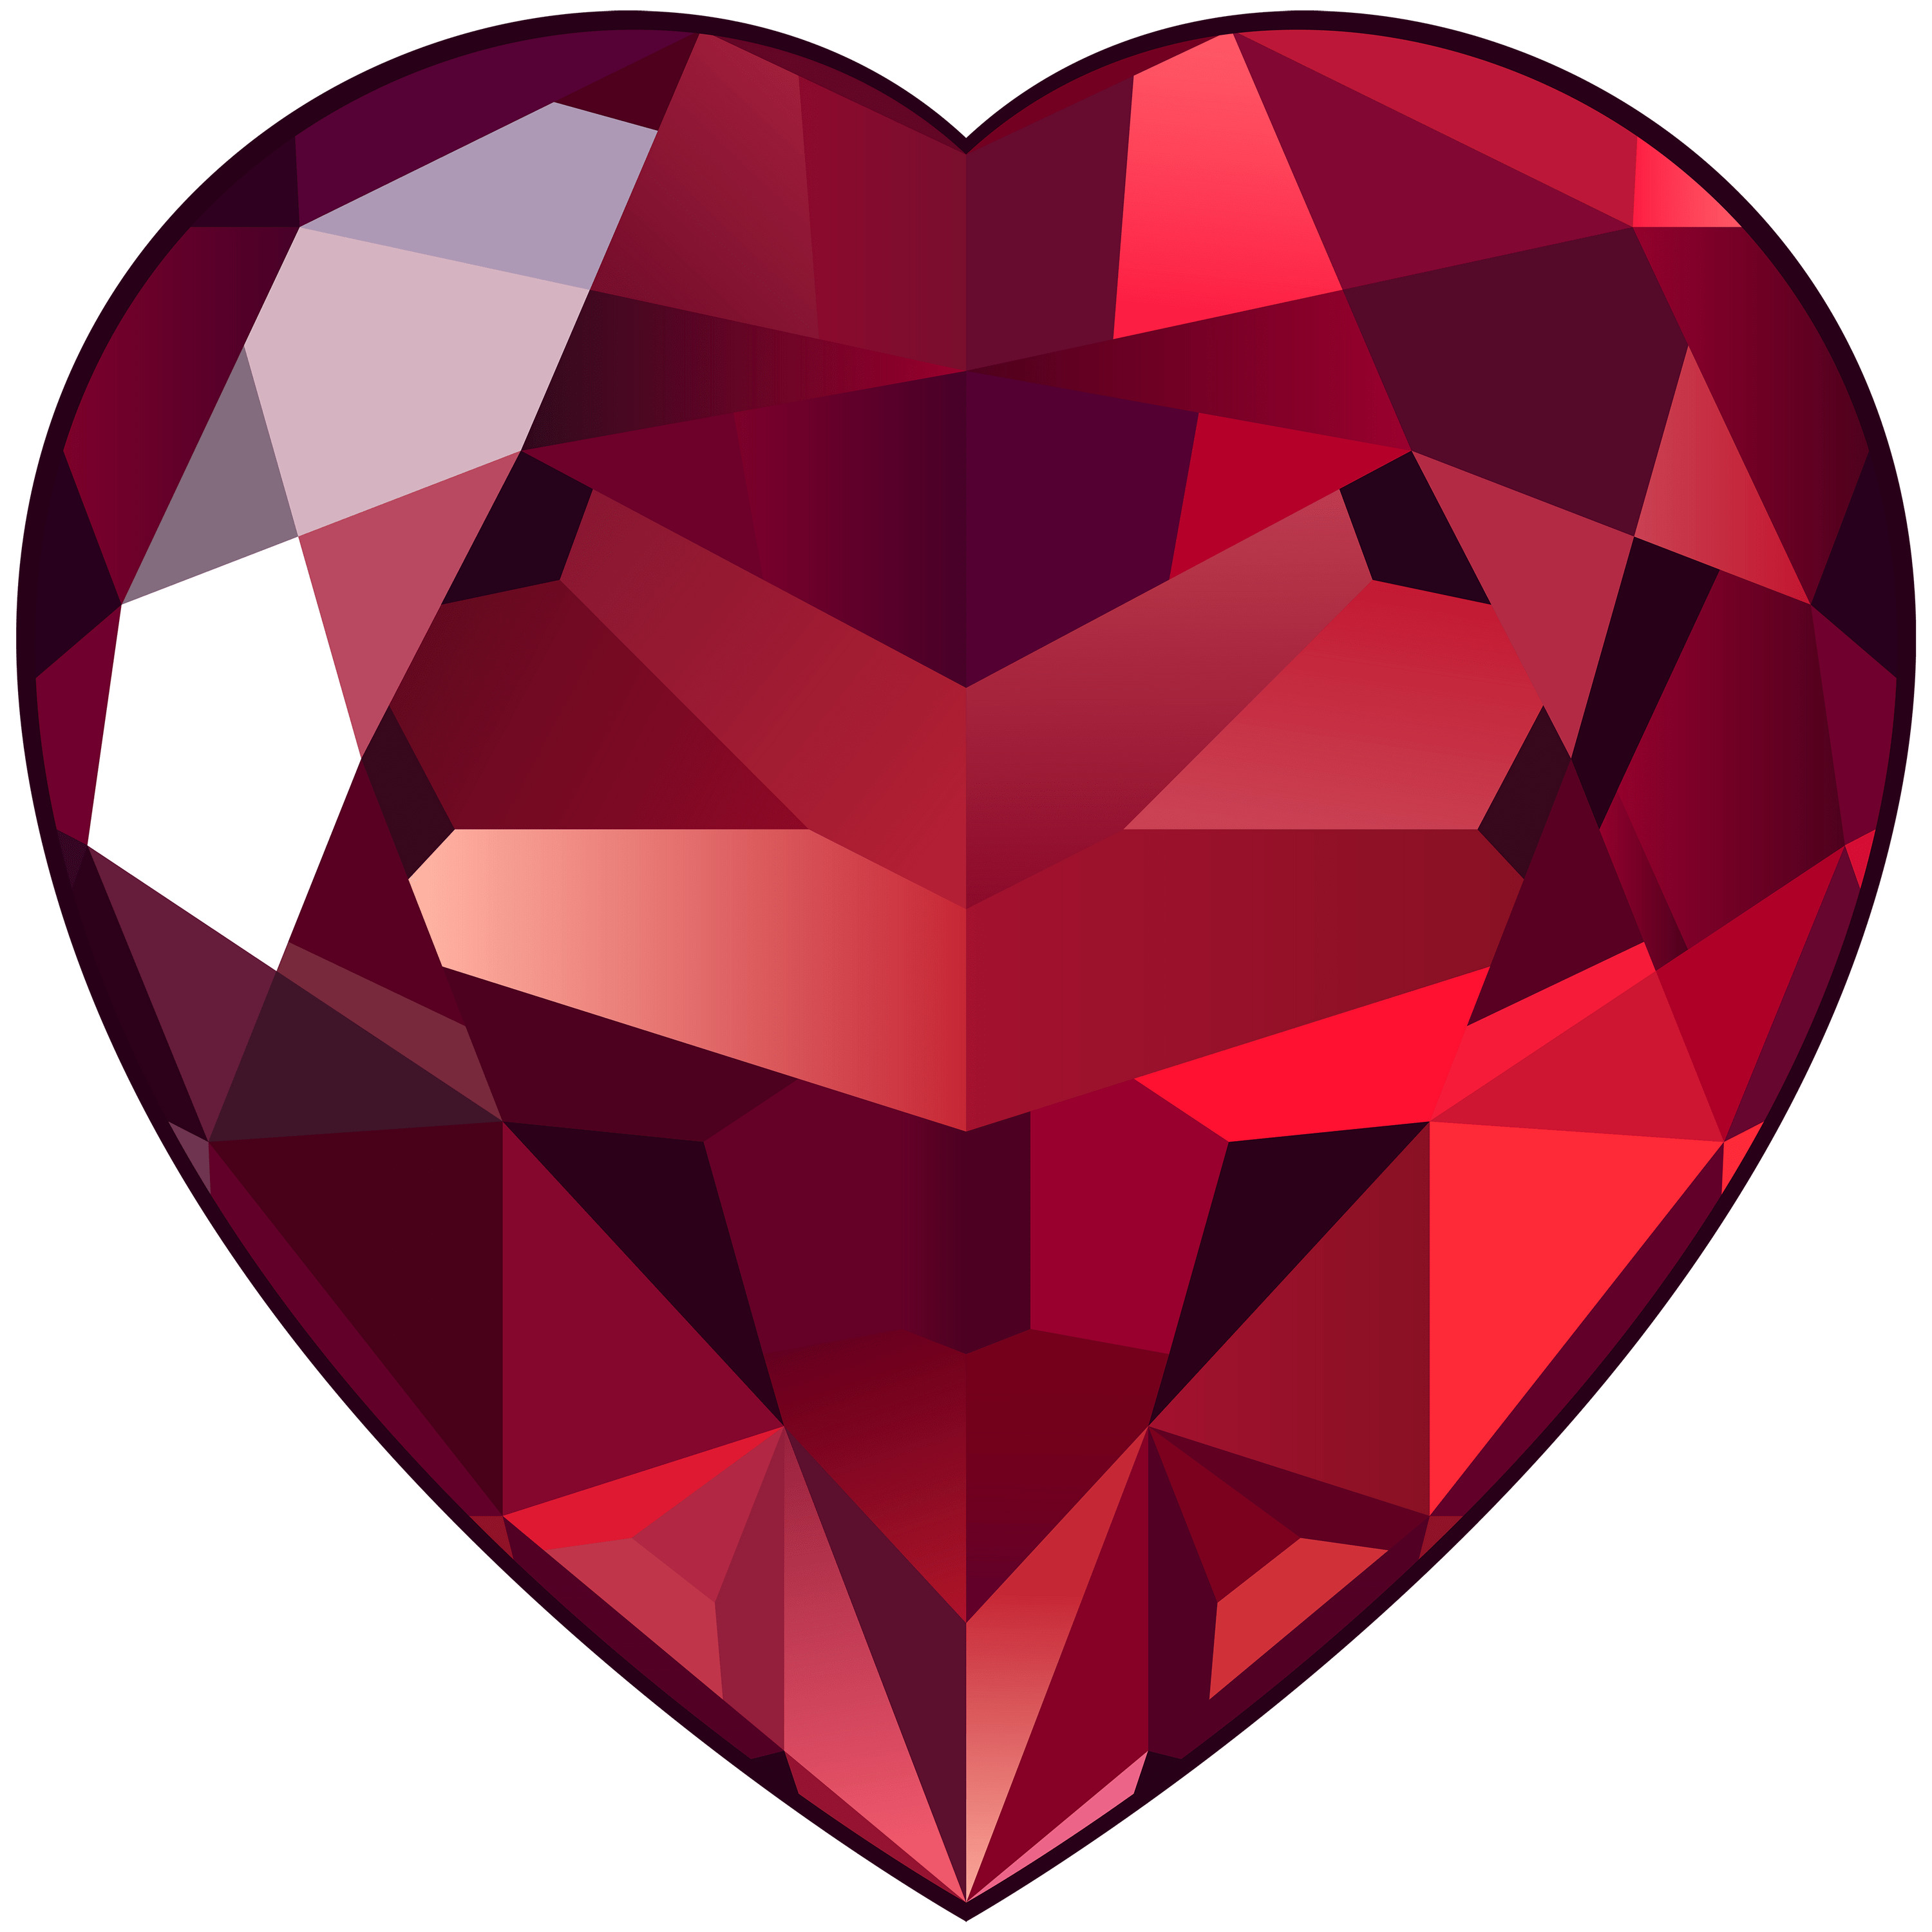 Large Ruby Heart Clipart icons